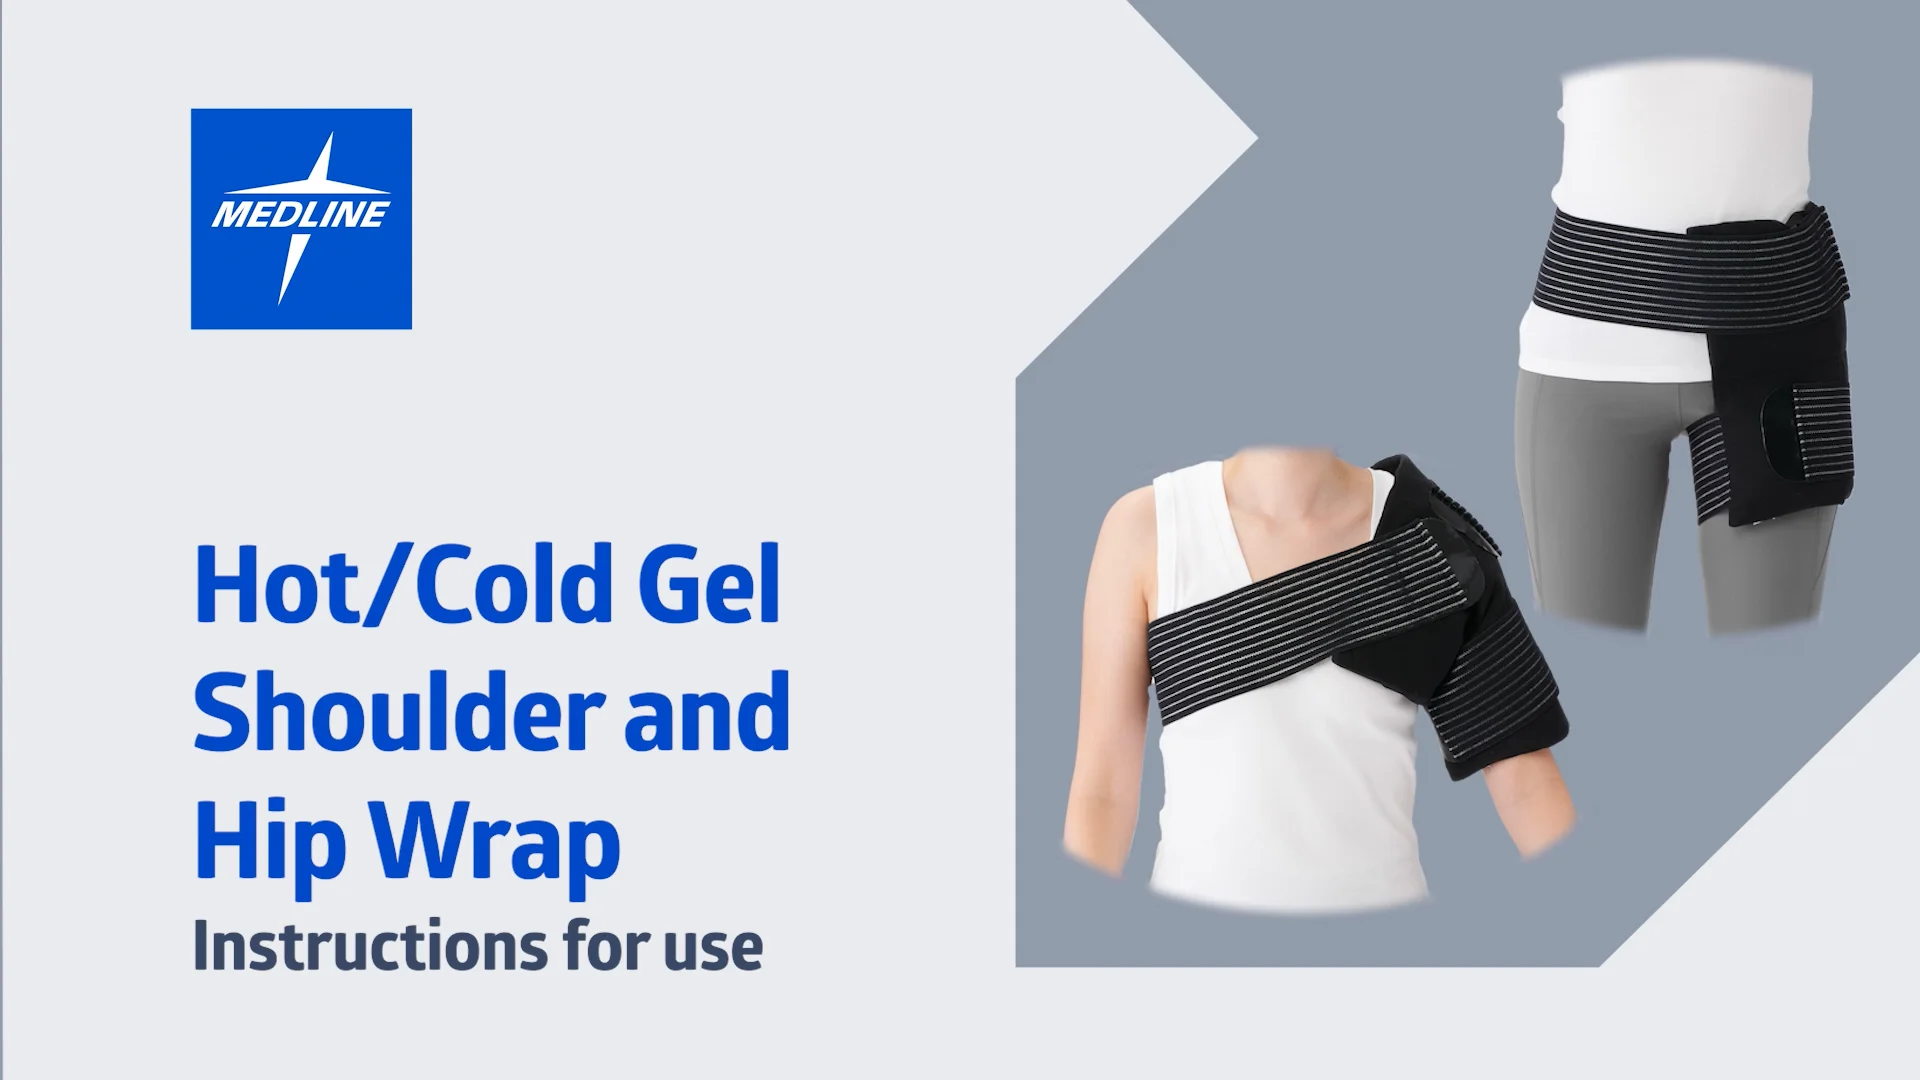 Hot/Cold Gel Shoulder and Hip Wrap instructions for use on Vimeo